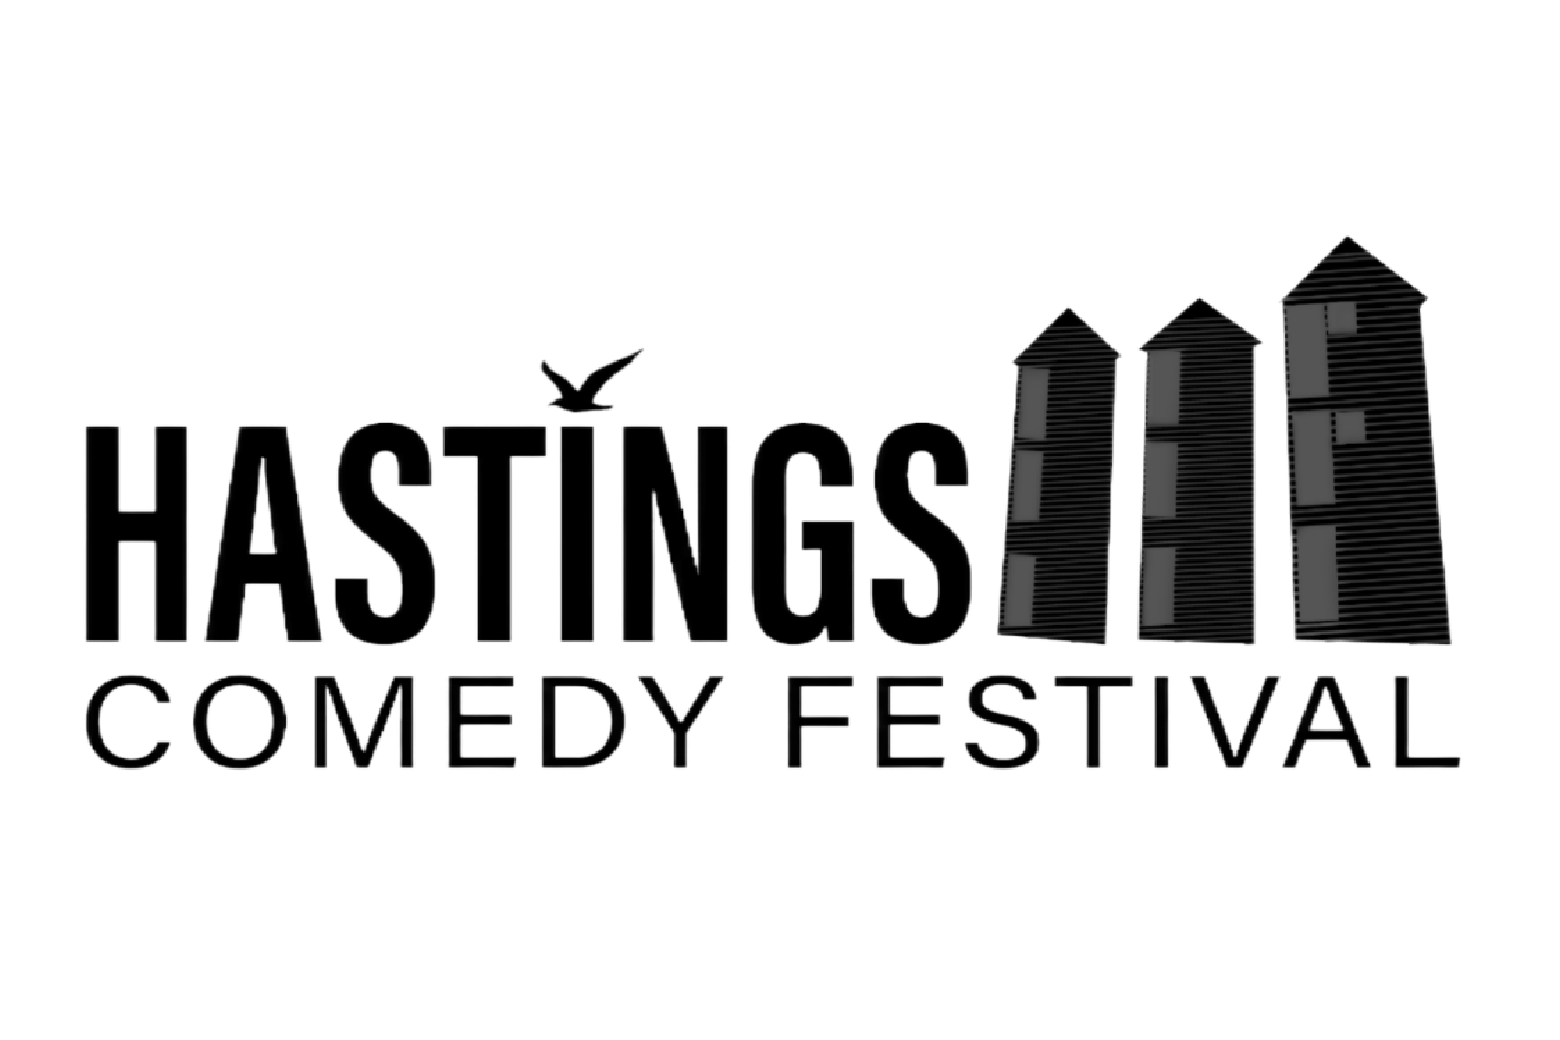 Hastings Comedy Festival logo including illustration of fishing huts